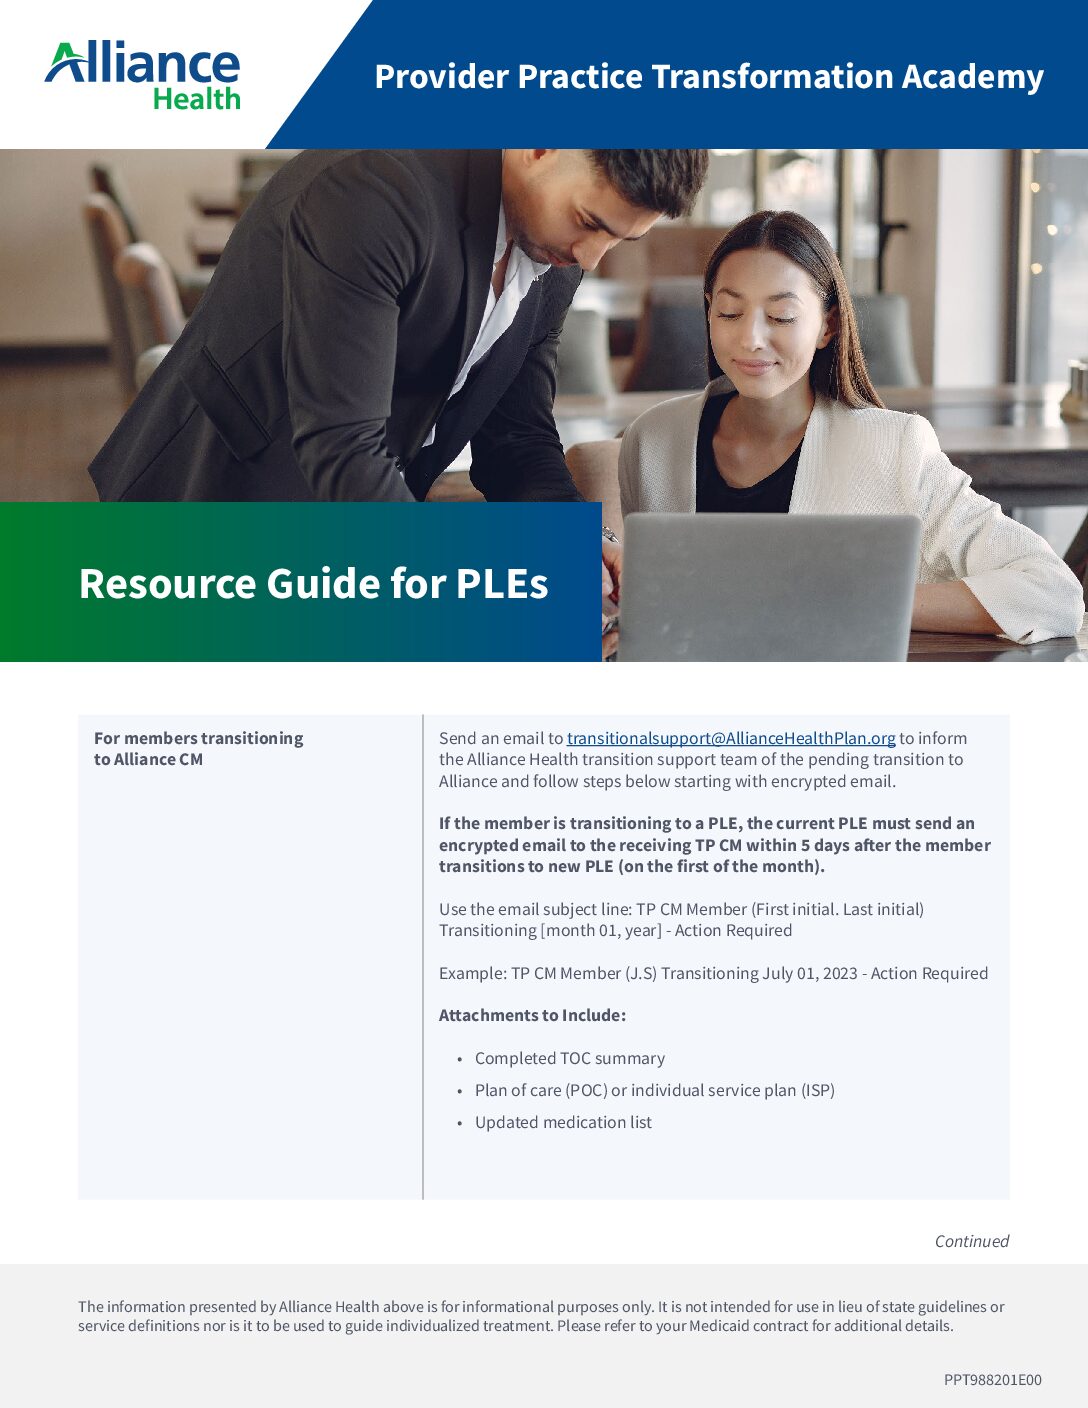 Resource Guide for PLEs